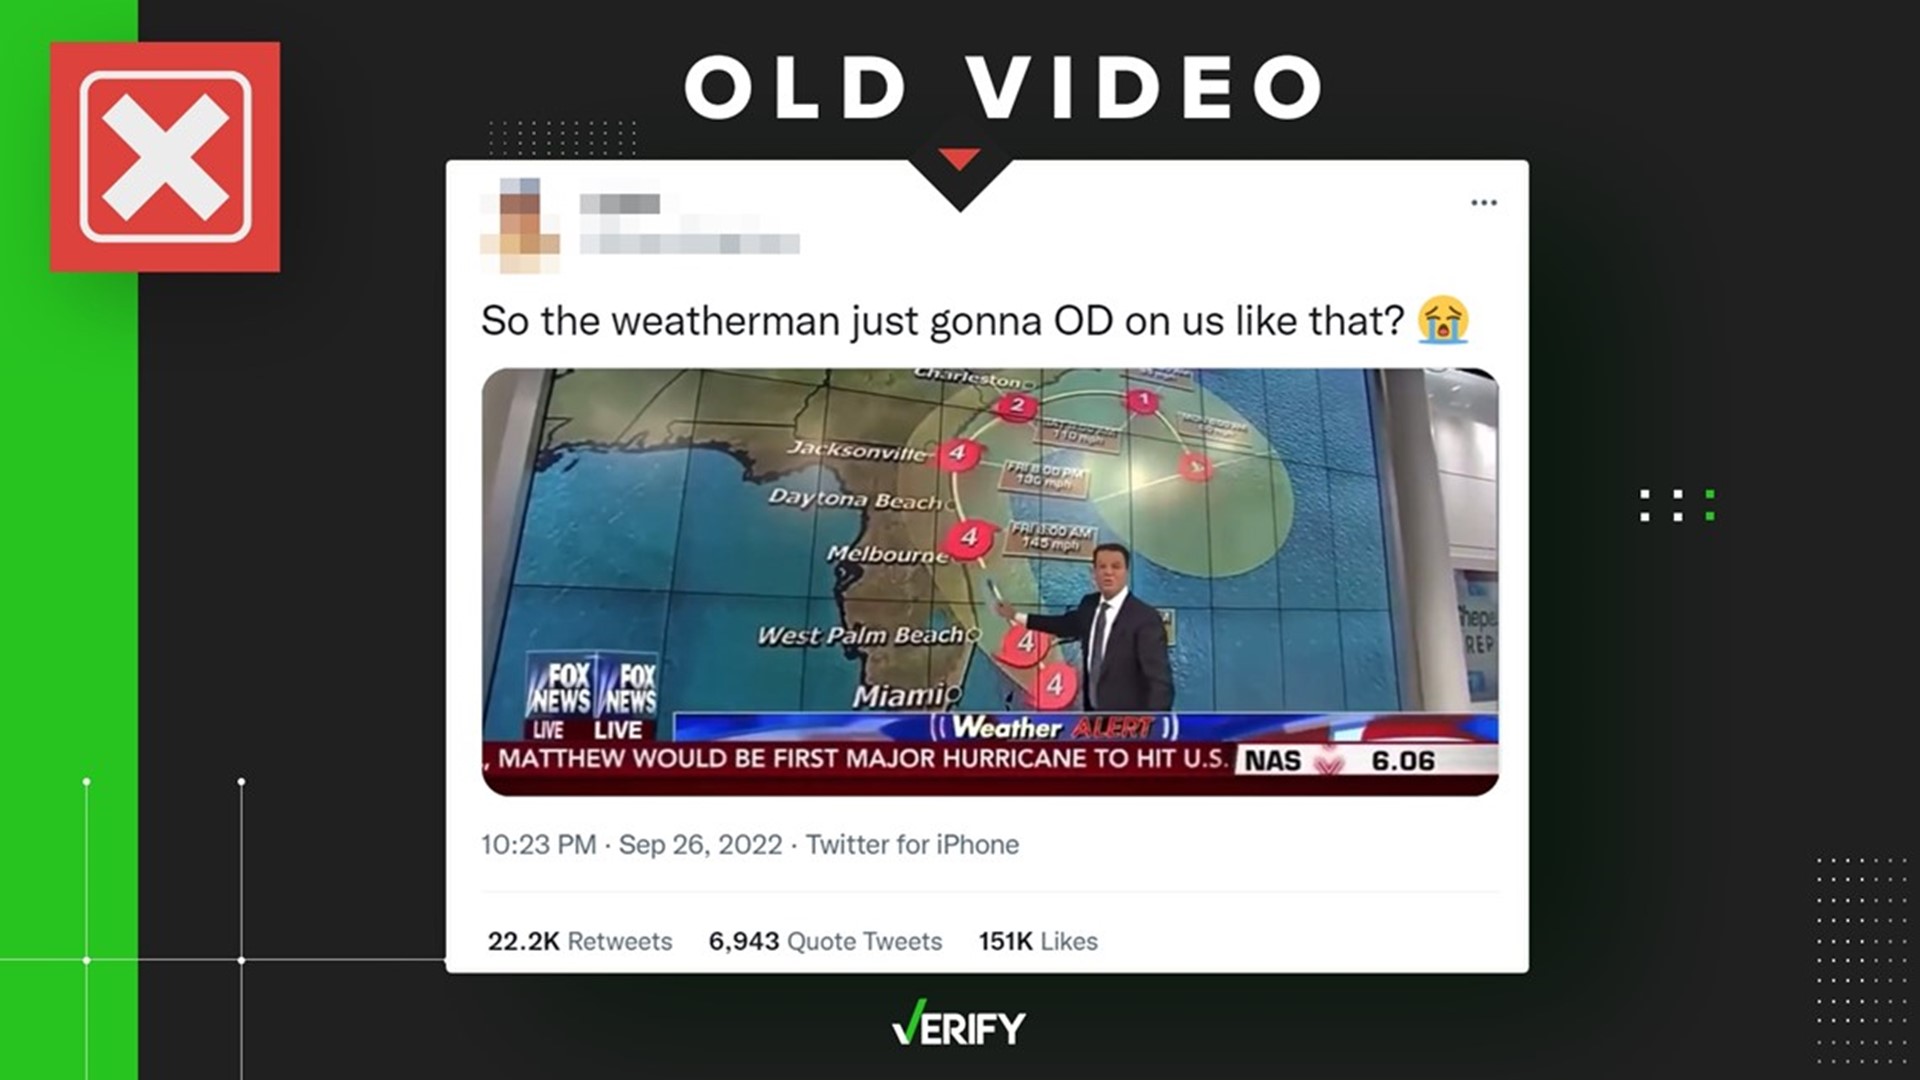 The viral clip shows Shepard Smith, who left Fox News in 2019, discussing the path of Hurricane Matthew, which hit the East Coast in October 2016.